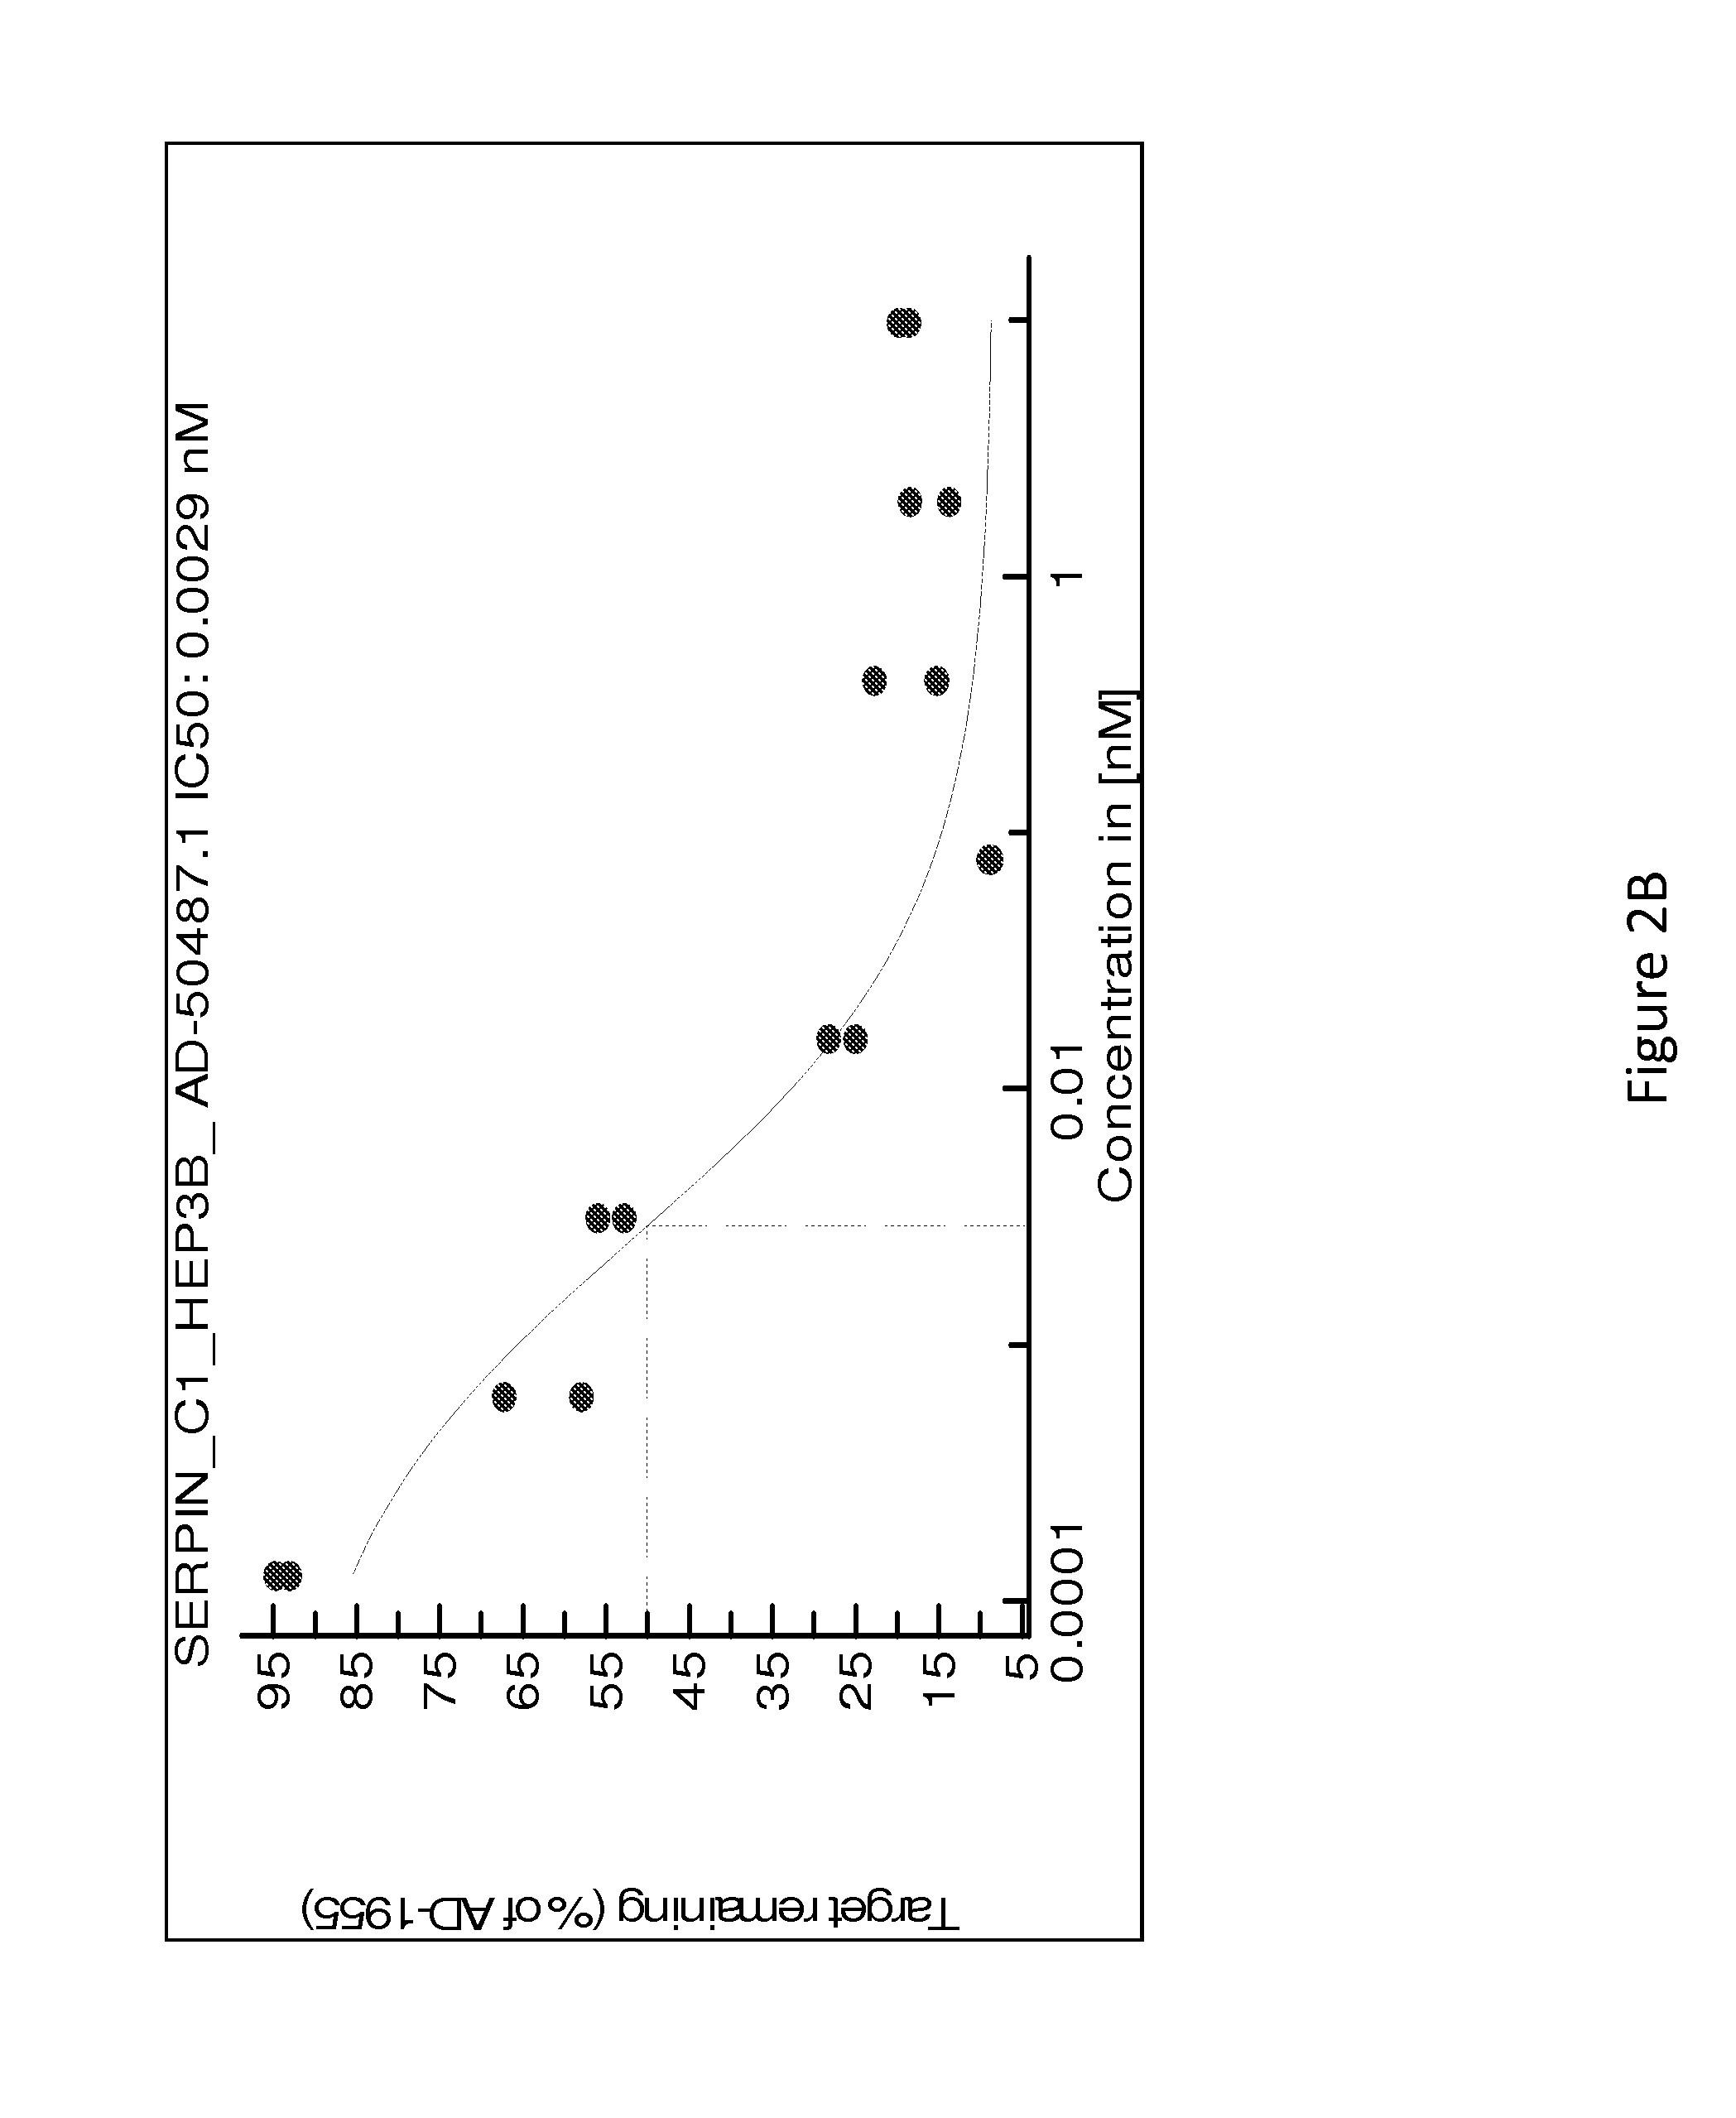 SERPINC1 iRNA COMPOSITIONS AND METHODS OF USE THEREOF